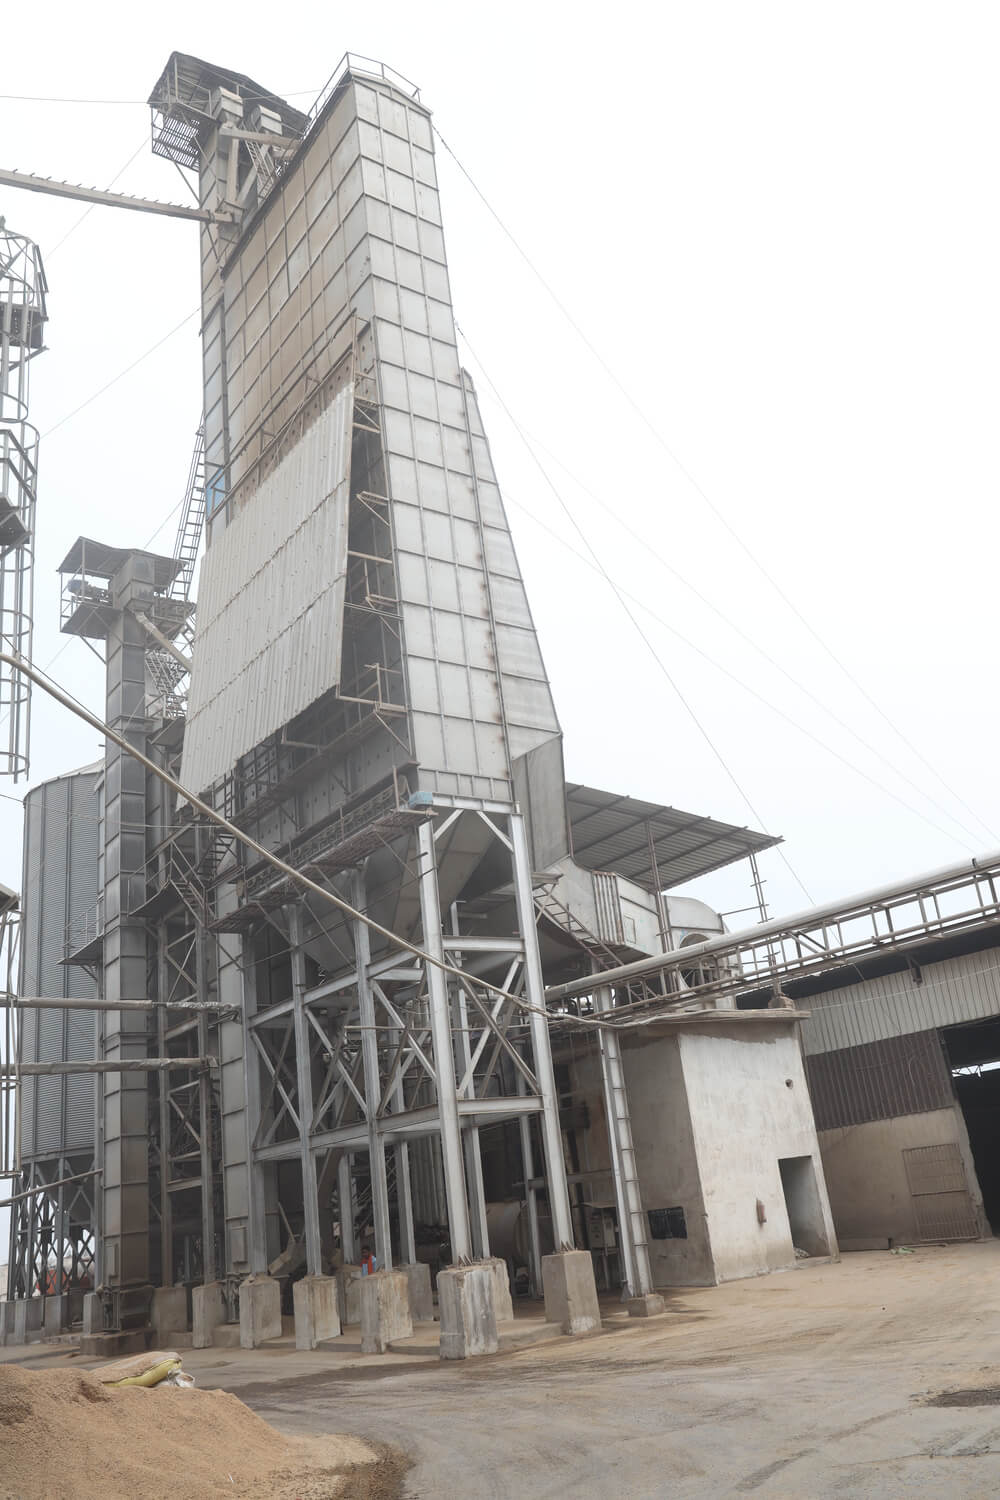 Drier for Rice Processing Plants